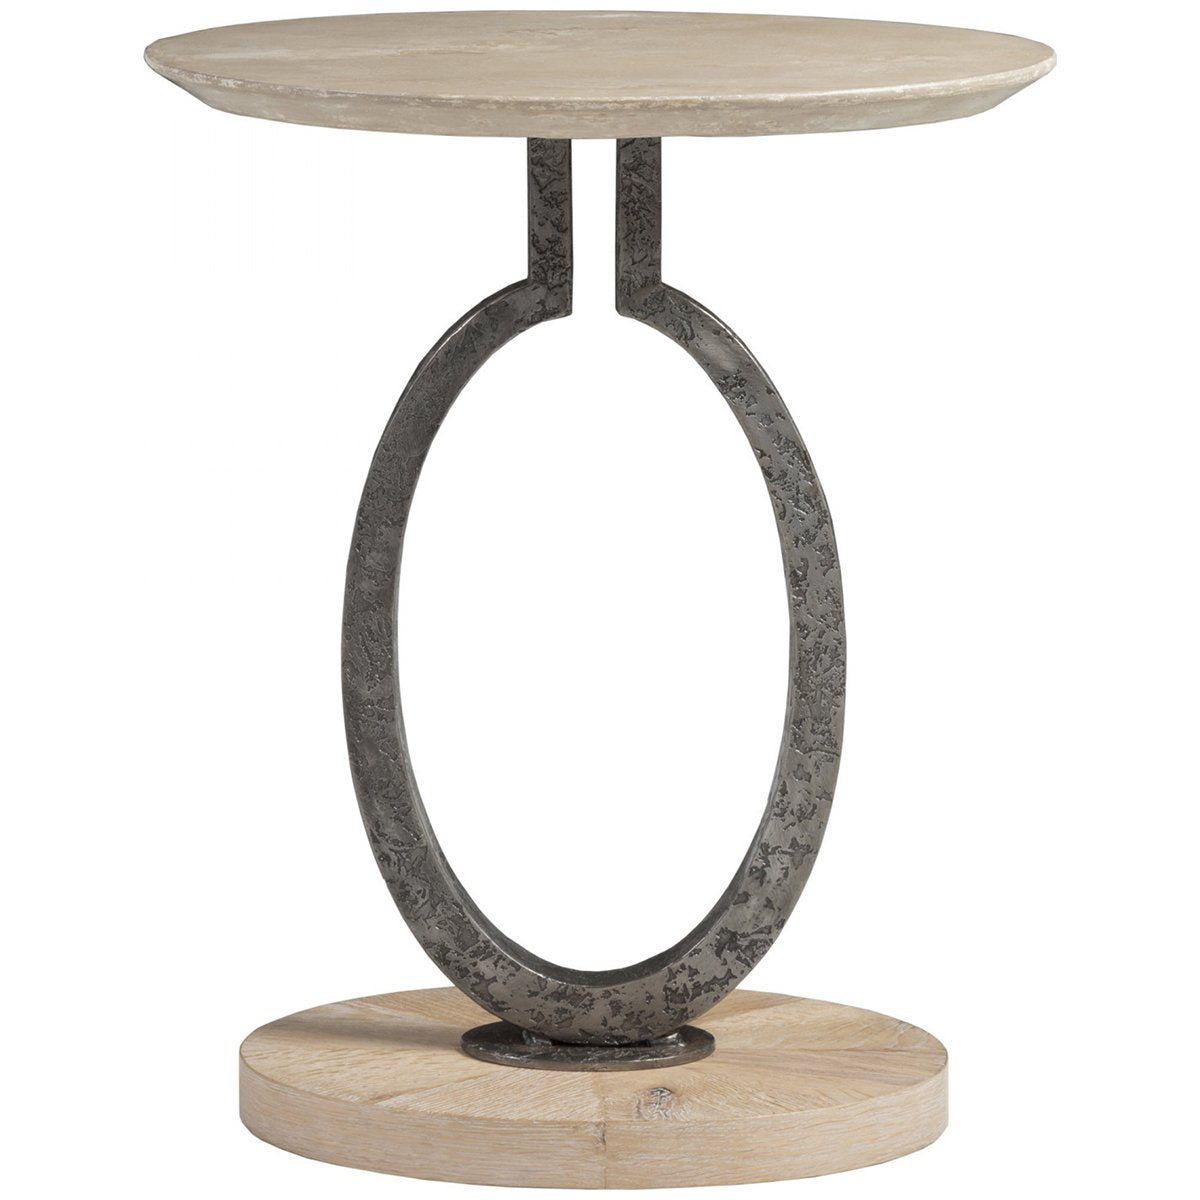 Artistica Home Clement Oval Spot Table 01-2179-952